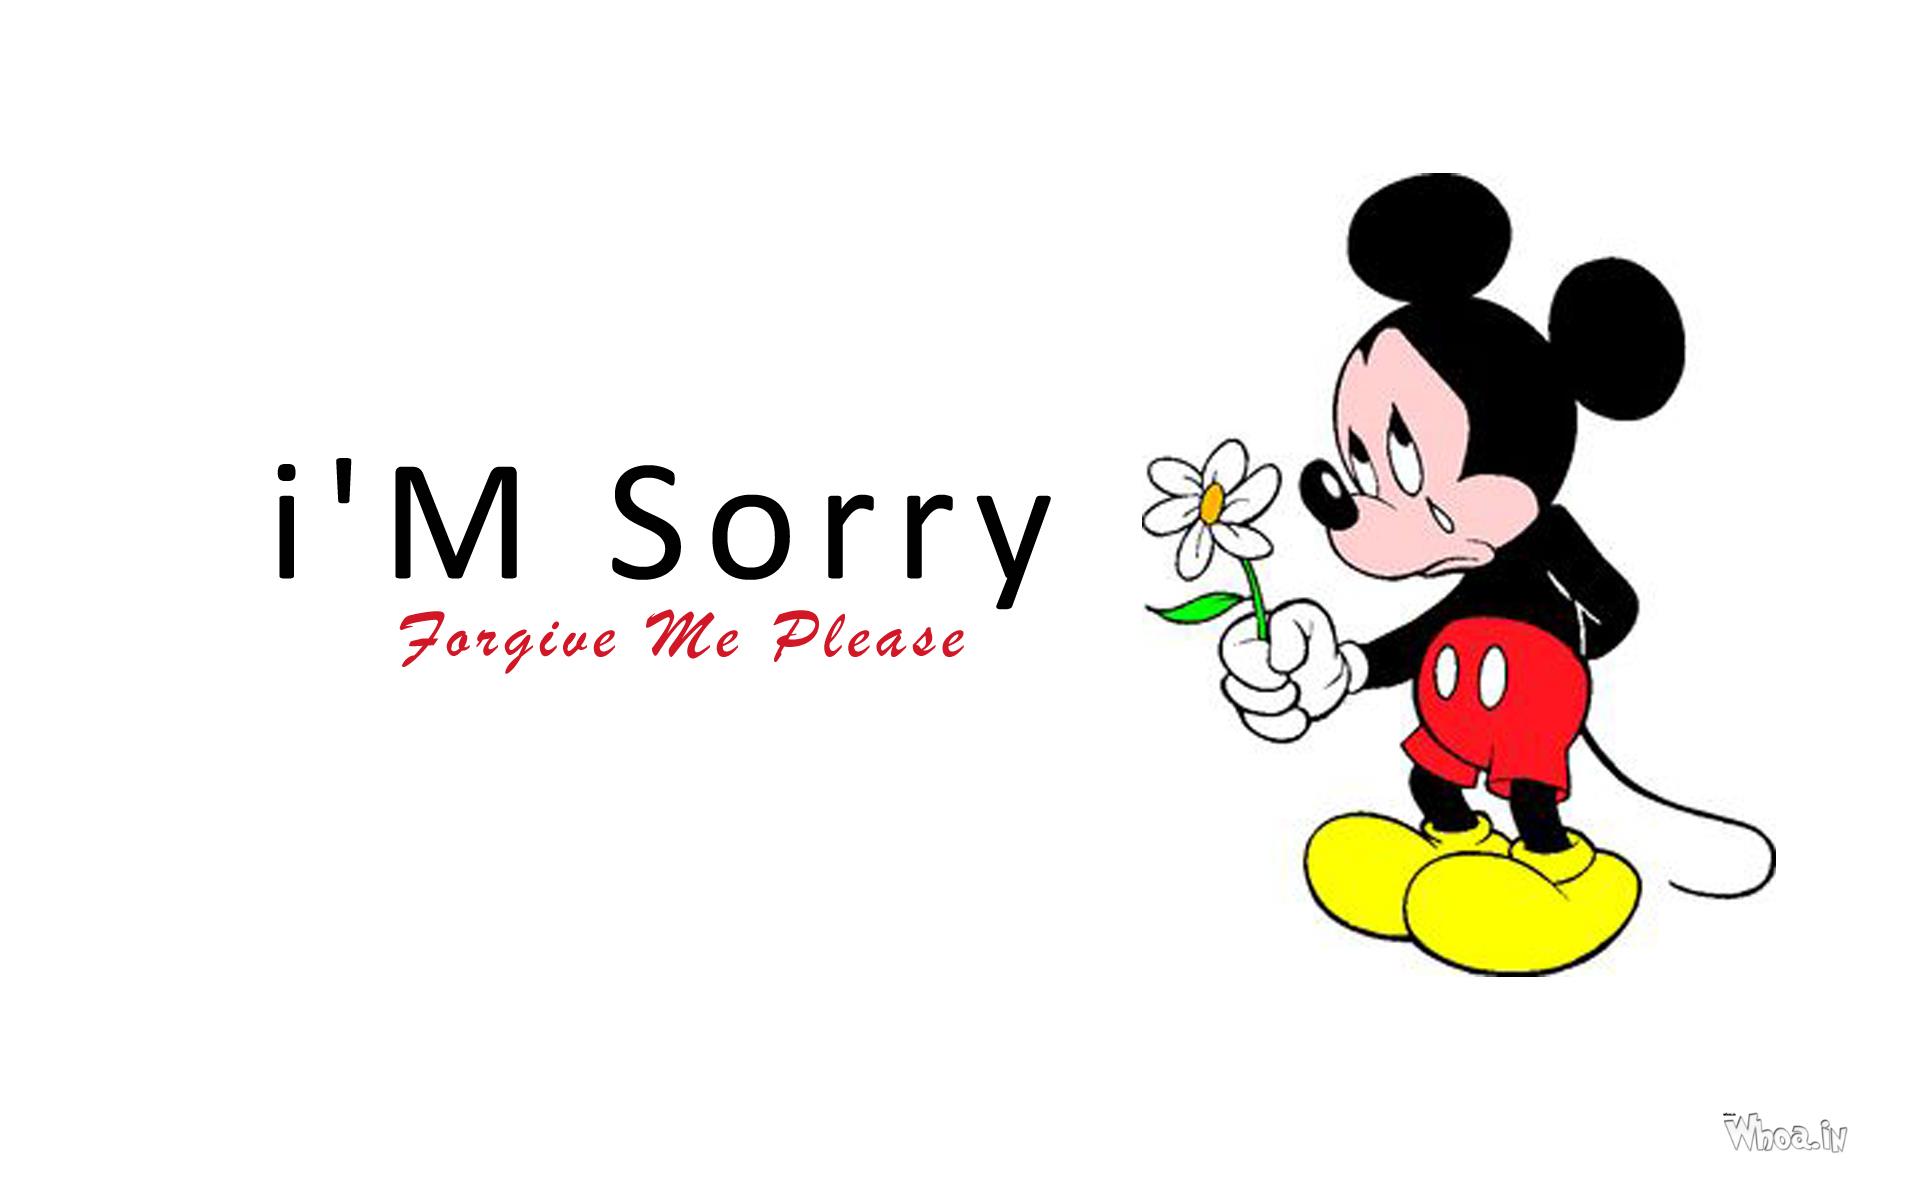 Ultimate Sorry Photo Gallery 200 Free Apology  Forgiveness Pictures   Pixabay